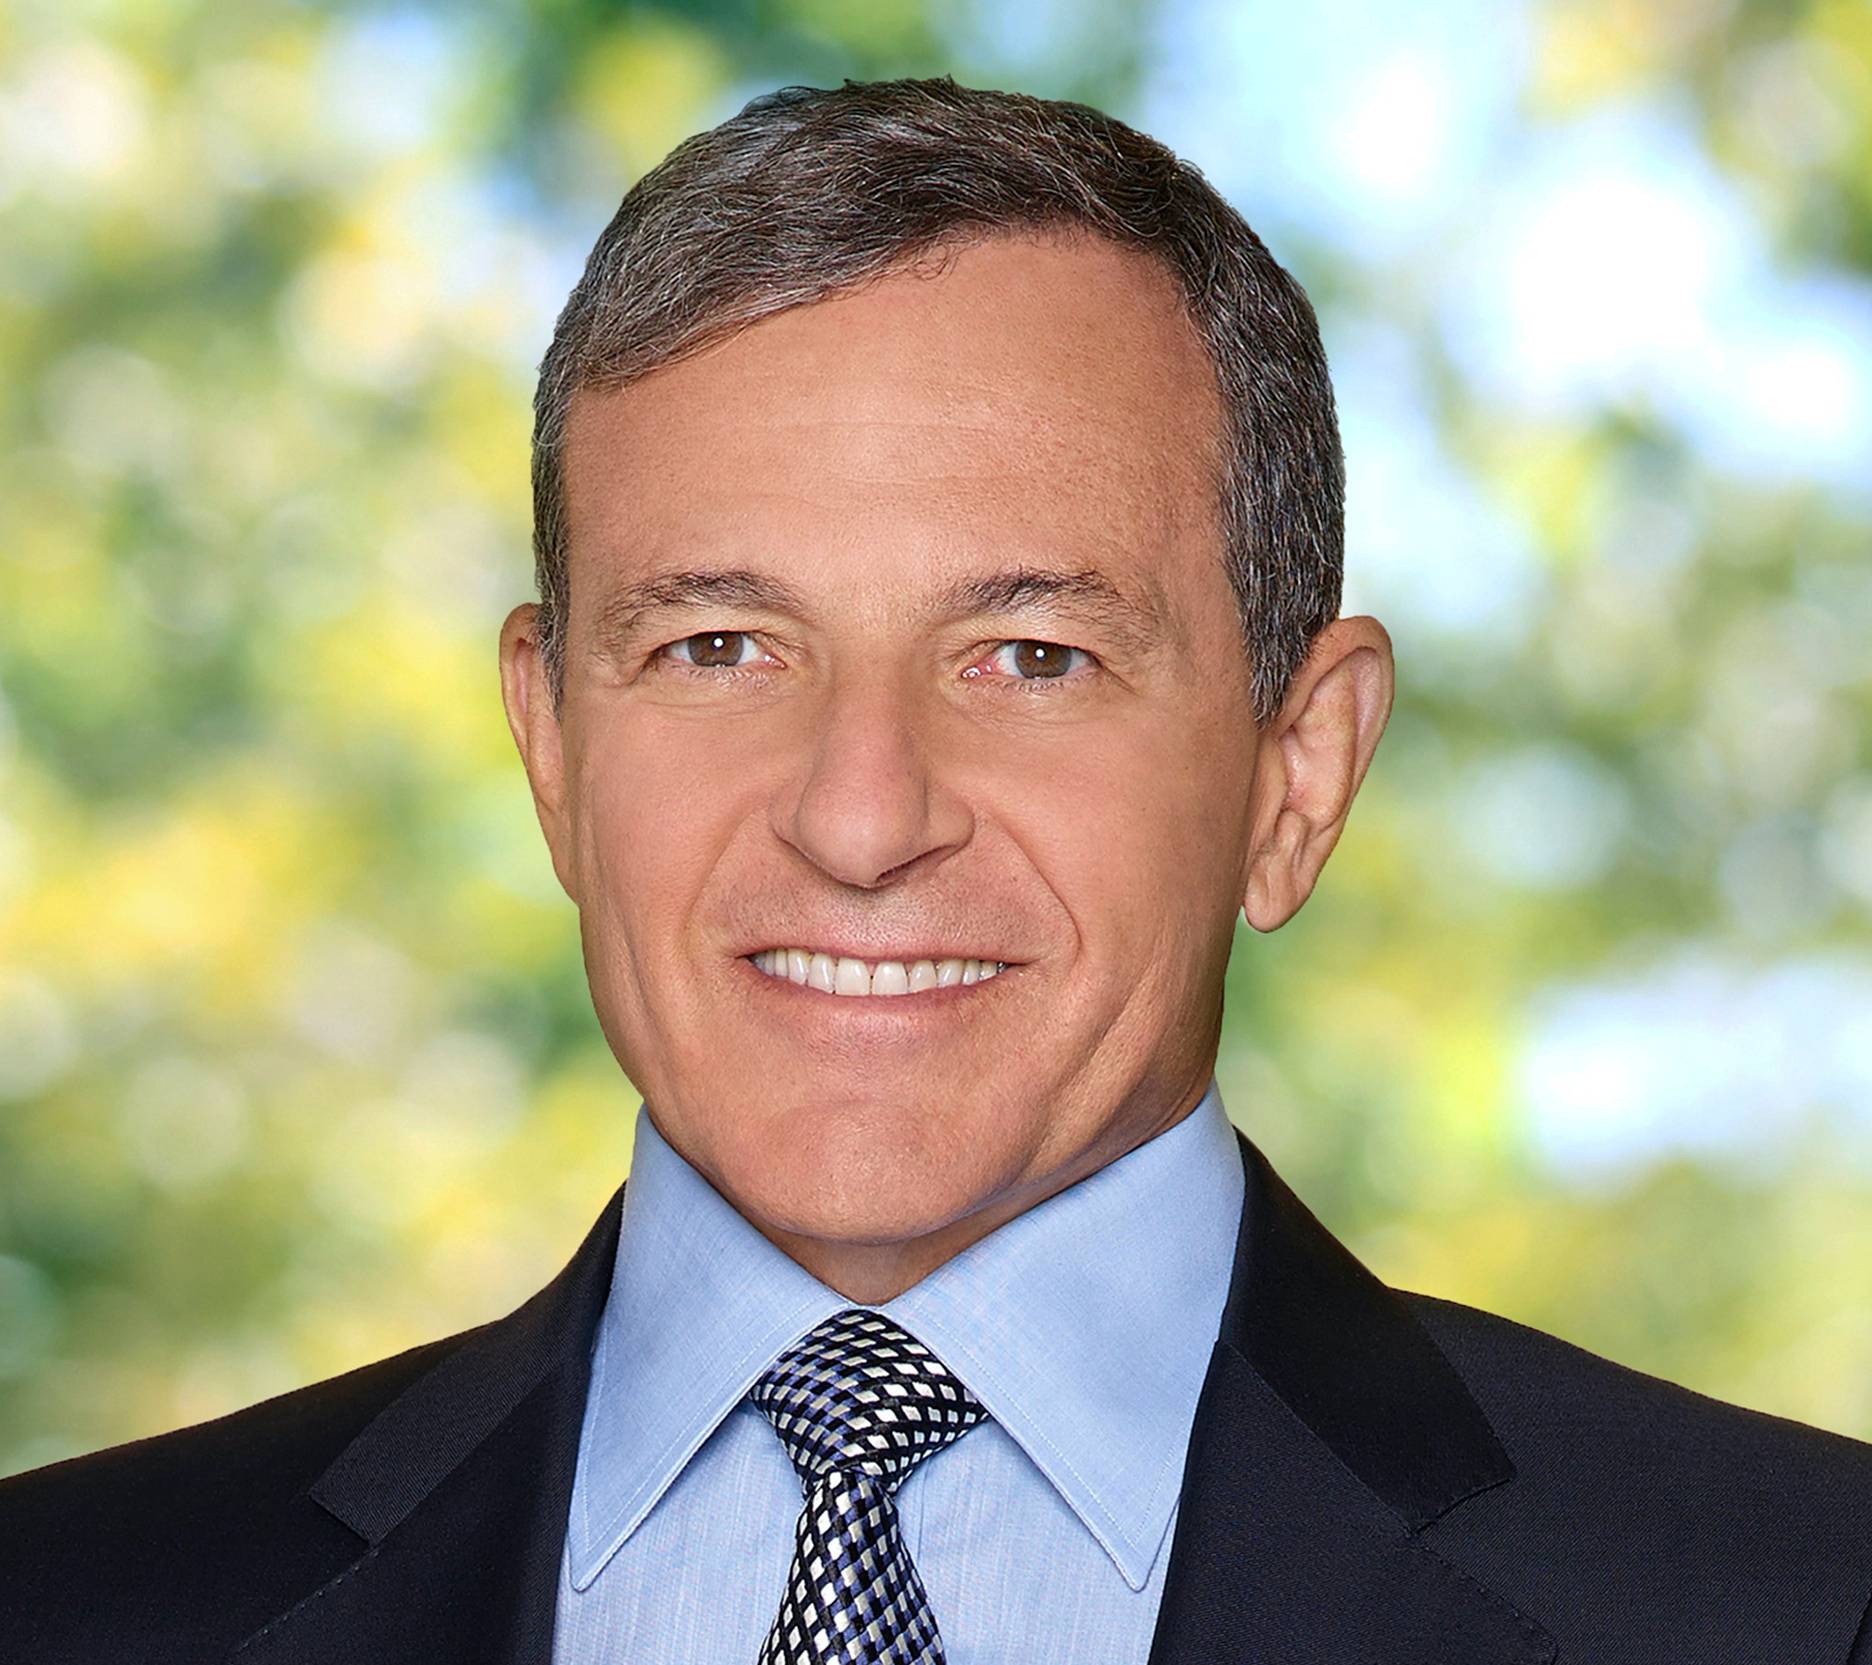 Bob Iger appeared on CNBC this morning following this announcement that Disney would cut 7,000 jobs and cut $5.5 billion in costs